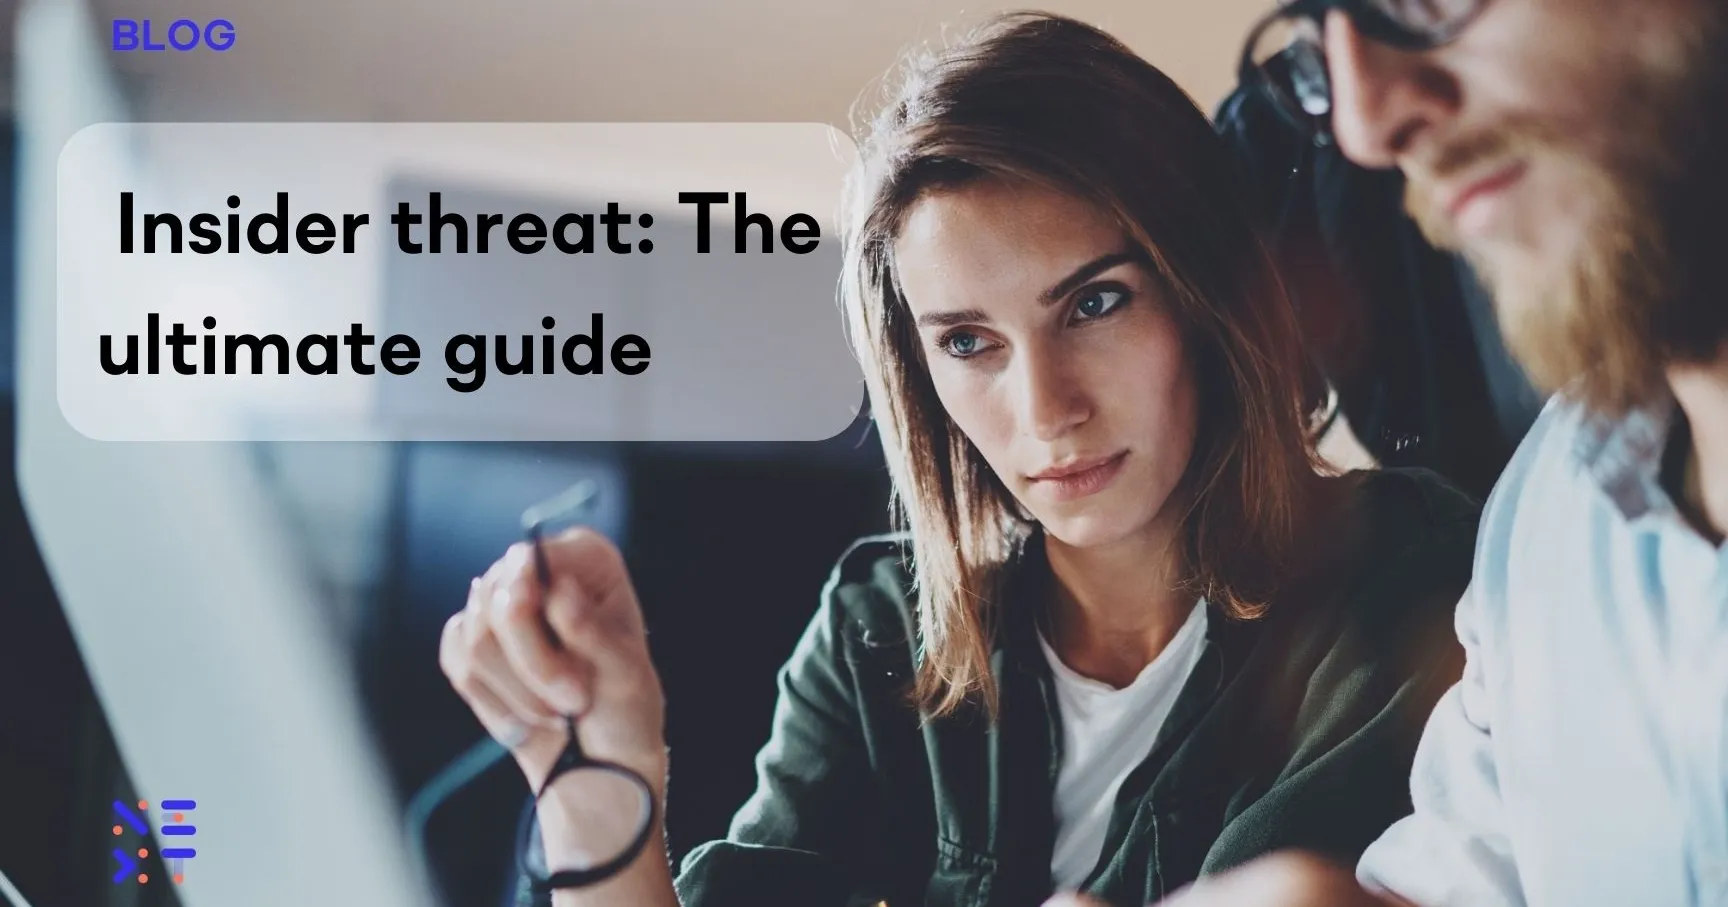 Insider threat: The ultimate guide